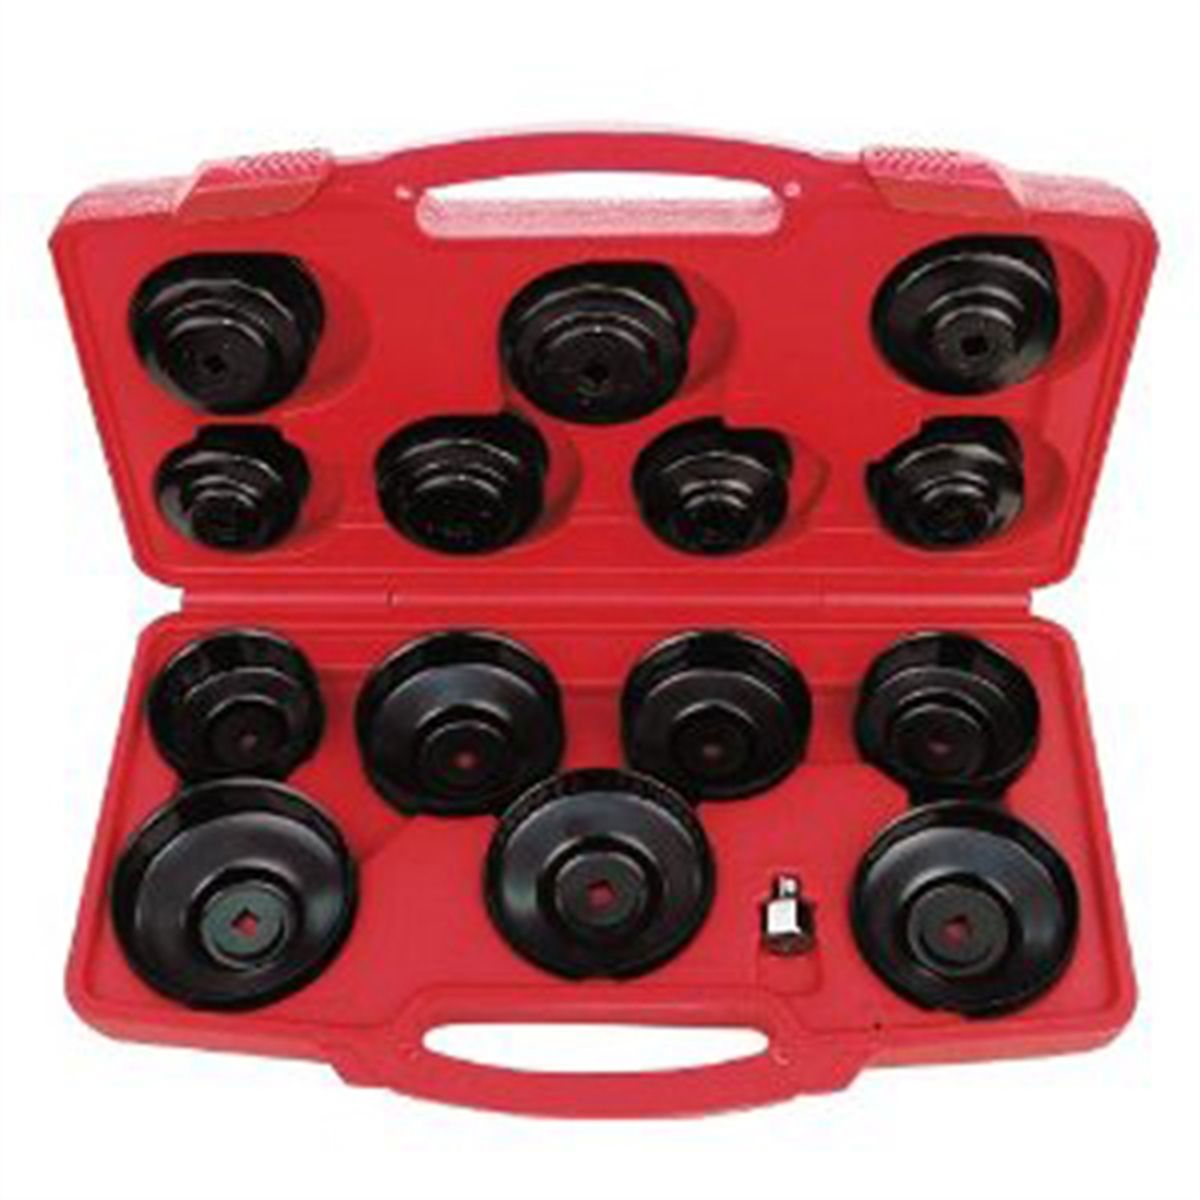 14 Pc Oil filter Wrench Set